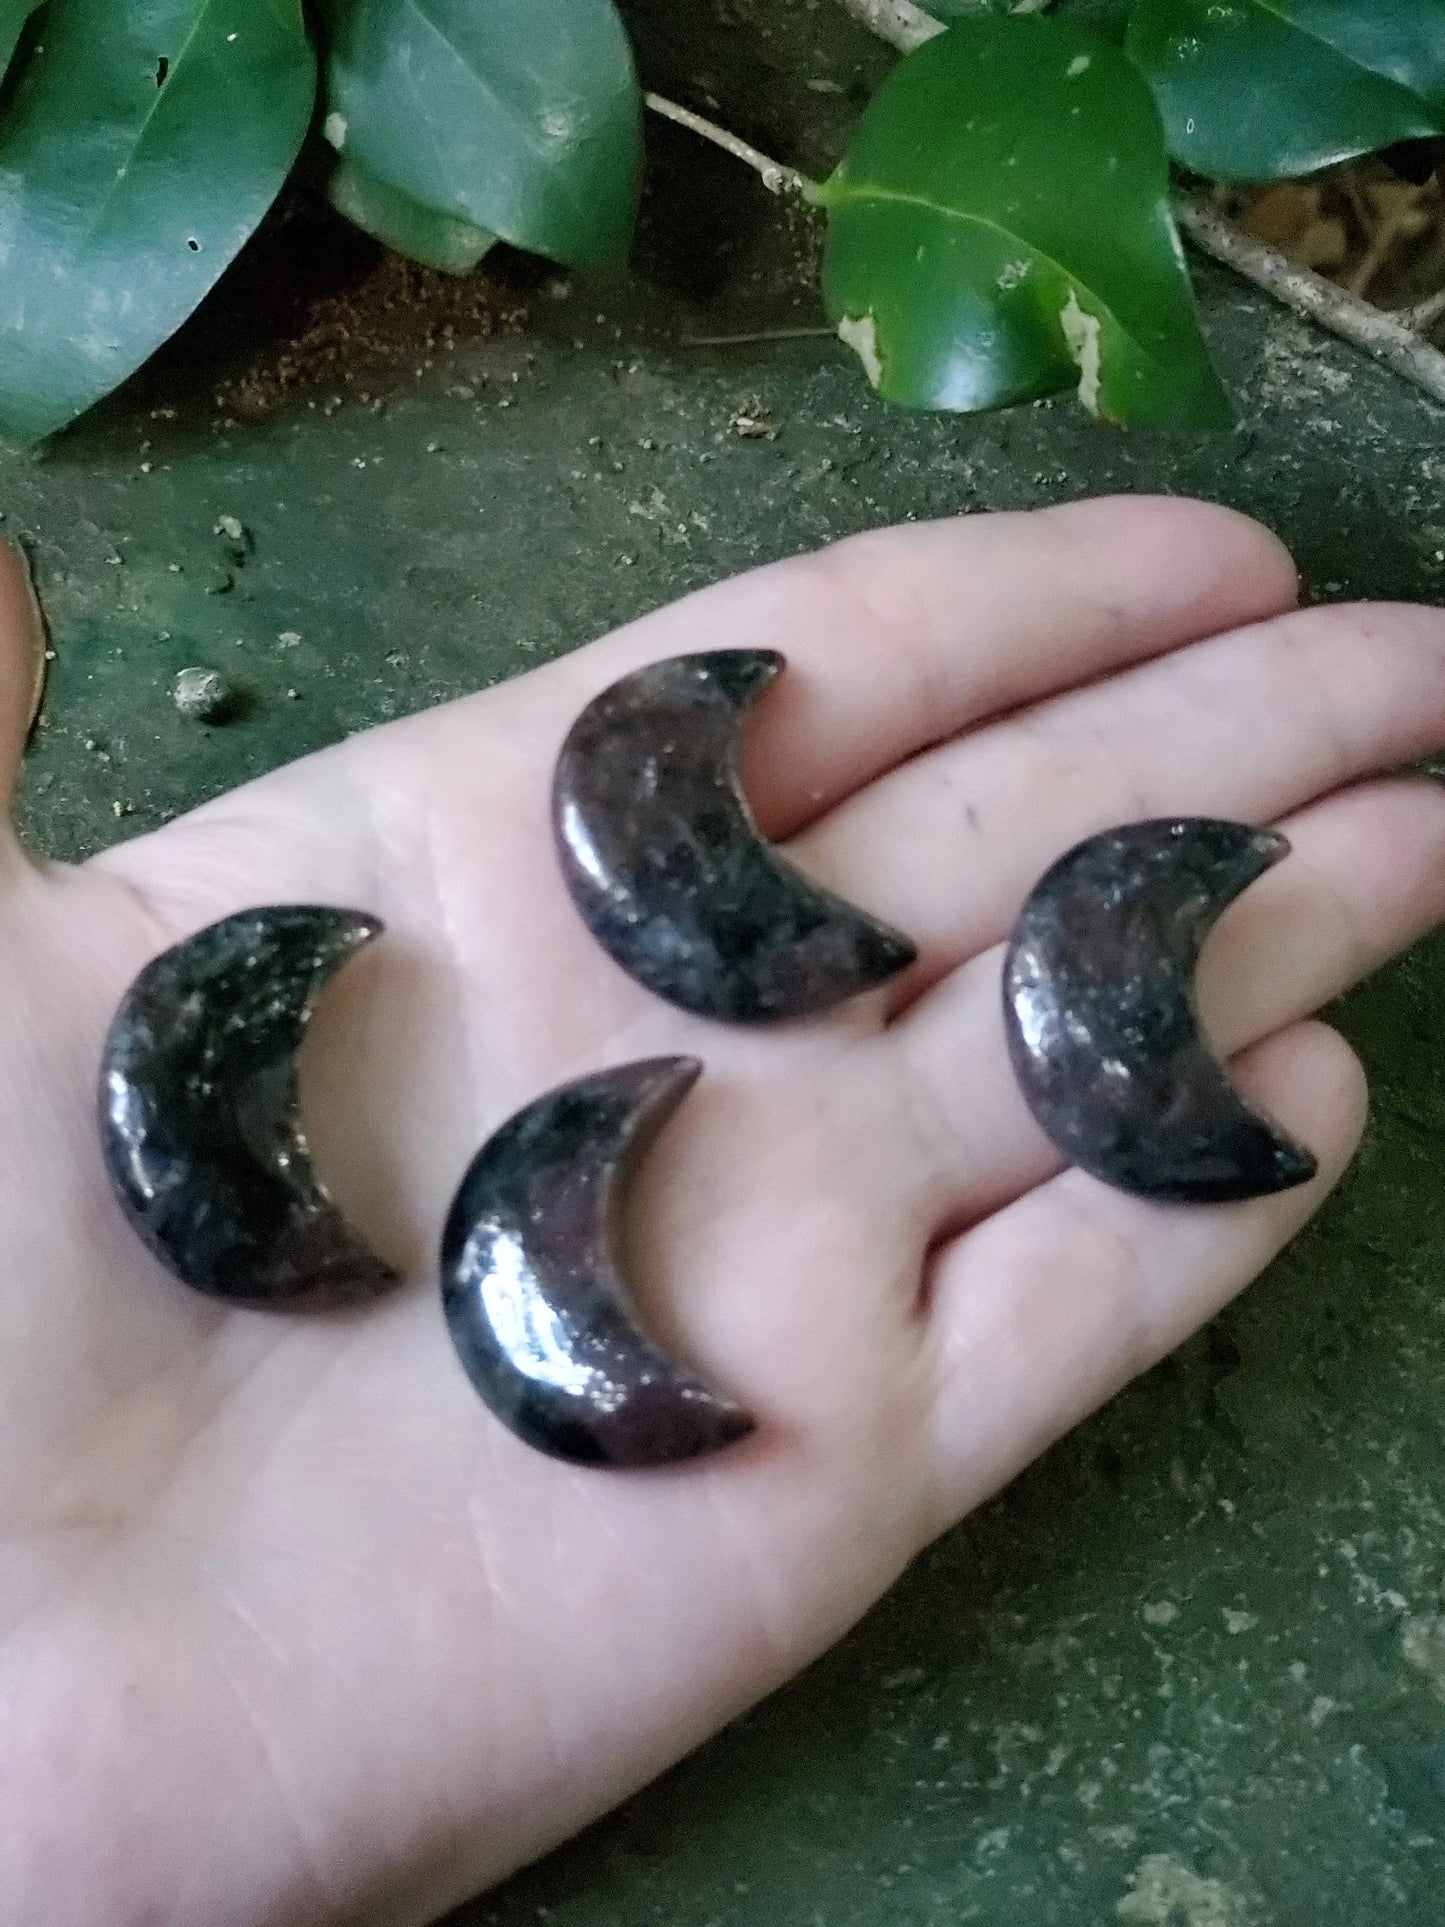 Garnet Crescent Moon Carving, Hand Carved, Natural Crystals and Gemstones, Gift Ideas, January Birthstone, Capricorn, Aquarius Zodiac